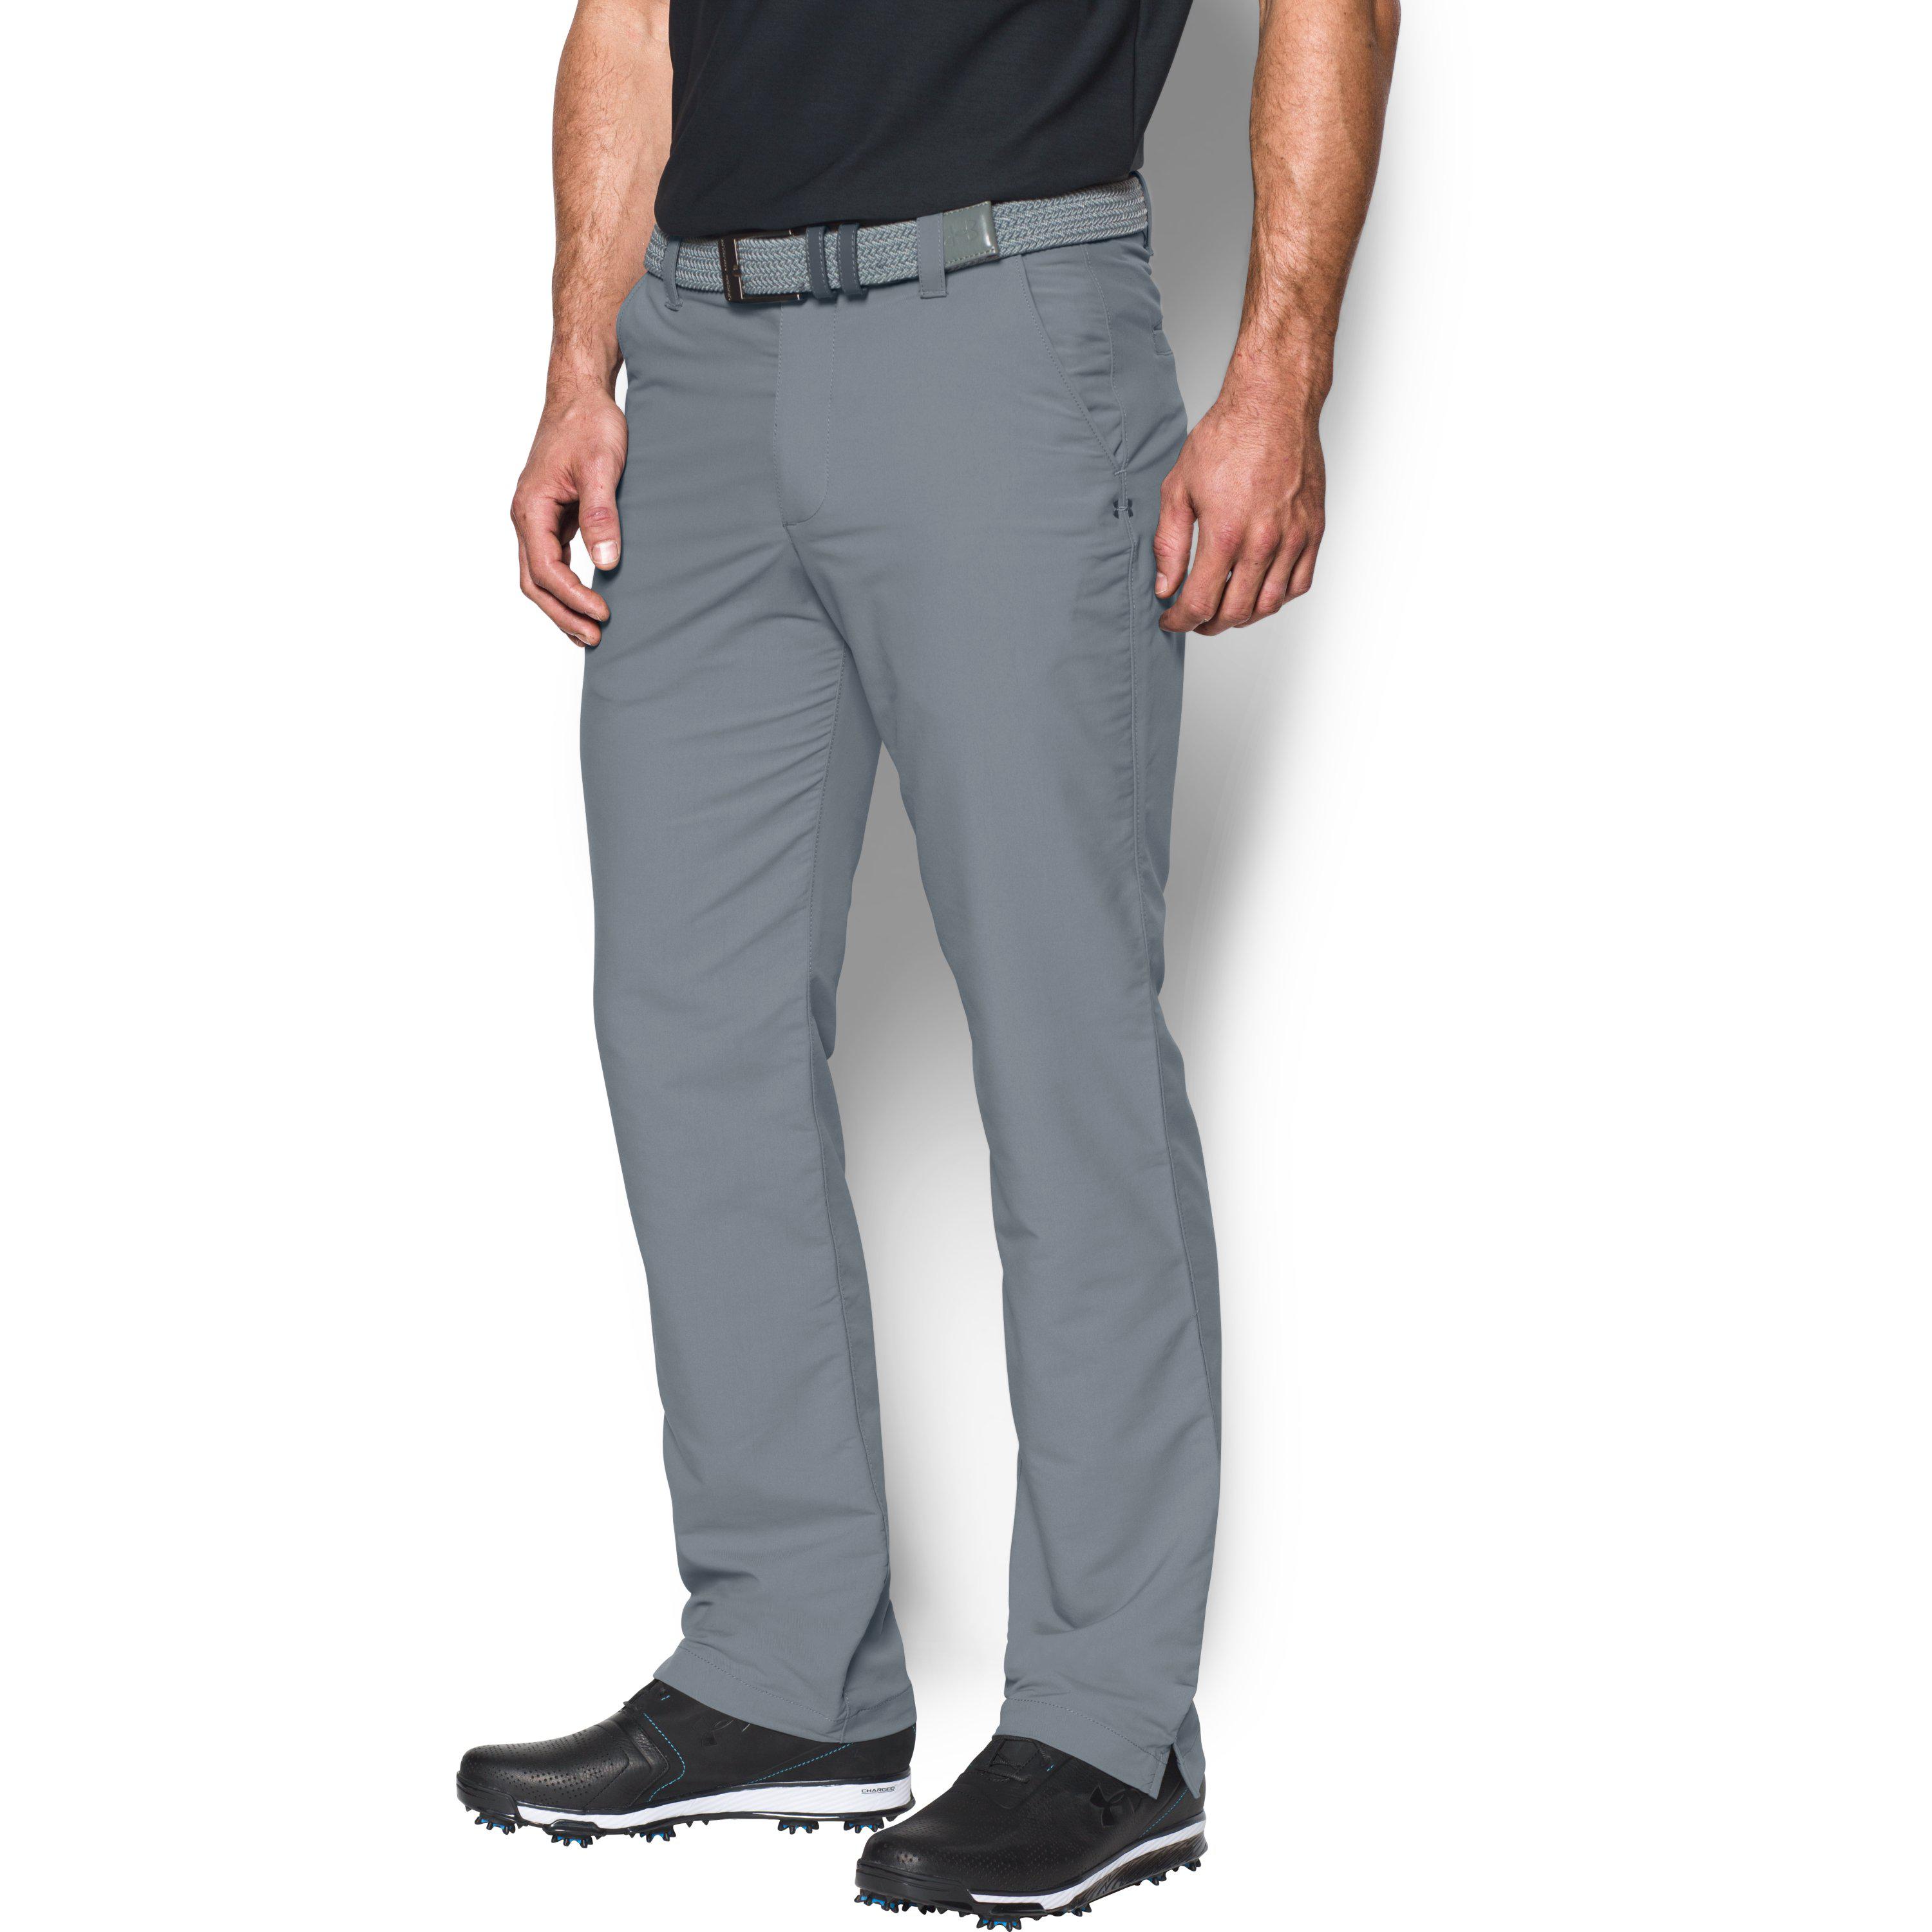 Under Armour Men's Match Play Vented Golf Pants | peacecommission.kdsg ...